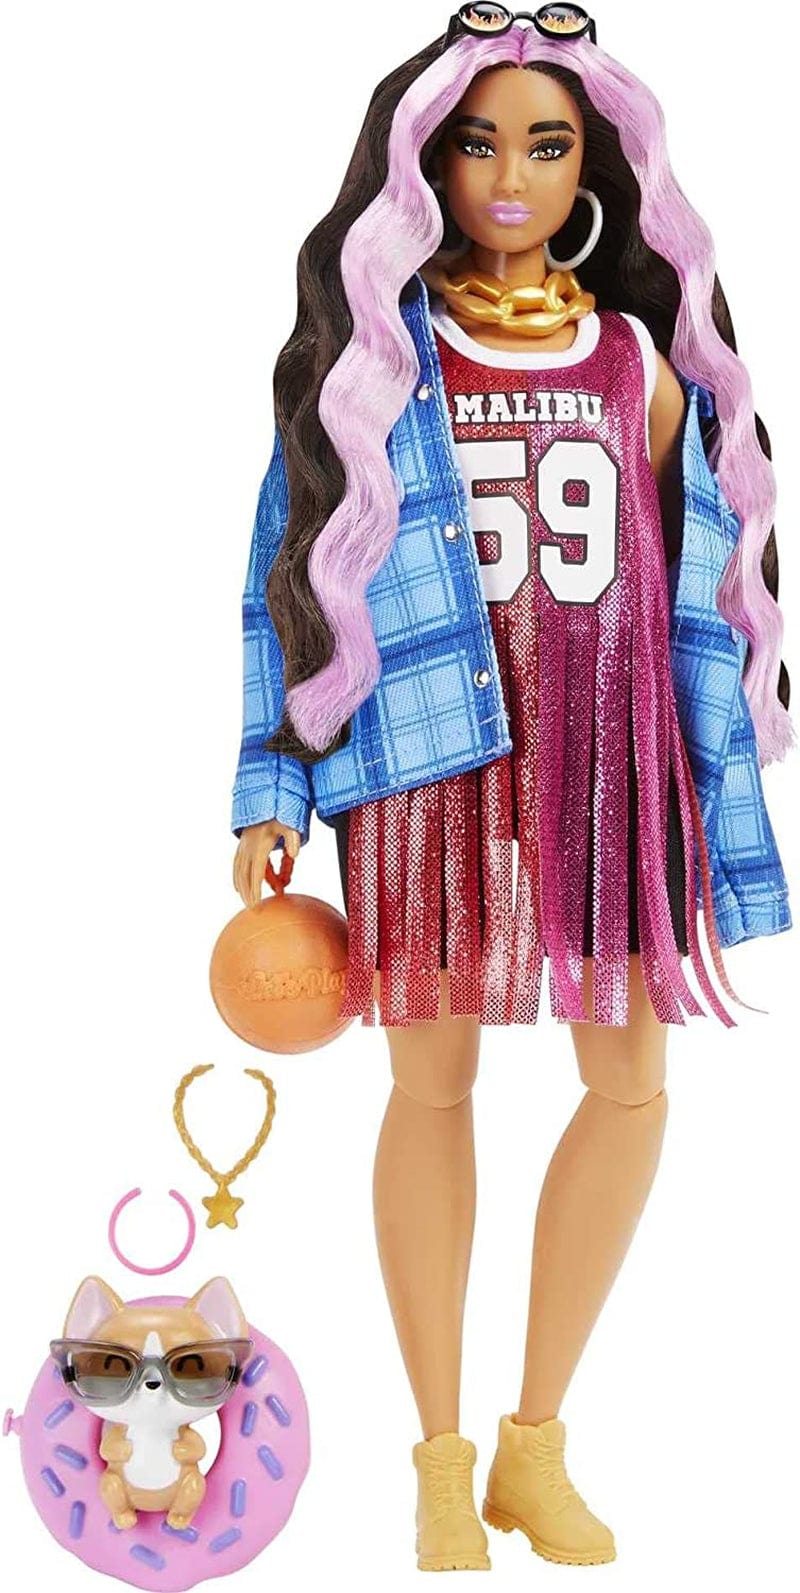 Barbie Dolls and Accessories, Barbie Extra Fashion Doll, Long Blonde Hair with Heart Icons and Pet Bunny, Floral Fashion, Toys and Gifts for Kids Sporting Goods > Outdoor Recreation > Winter Sports & Activities Mattel Pink Streaks Jersey Dress  